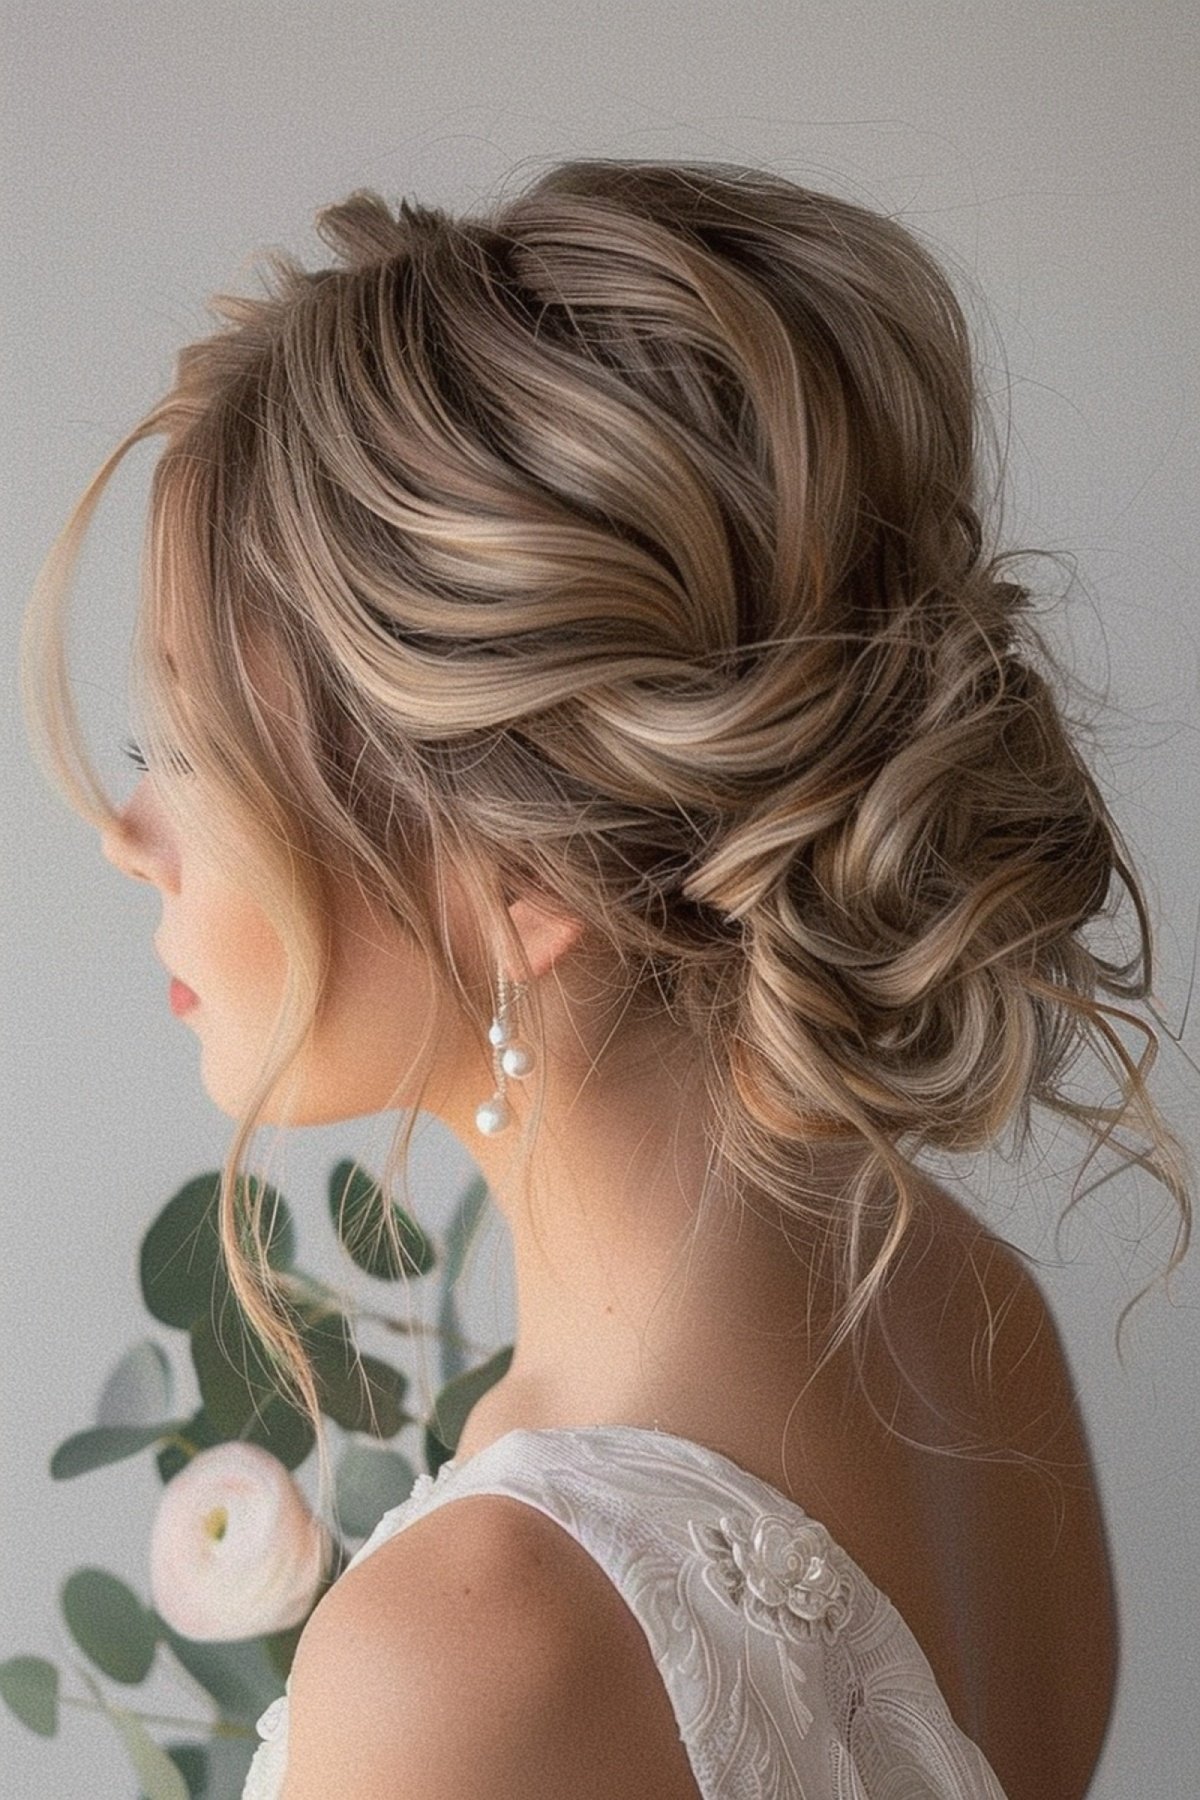 Wedding updo with balayage highlights and curls